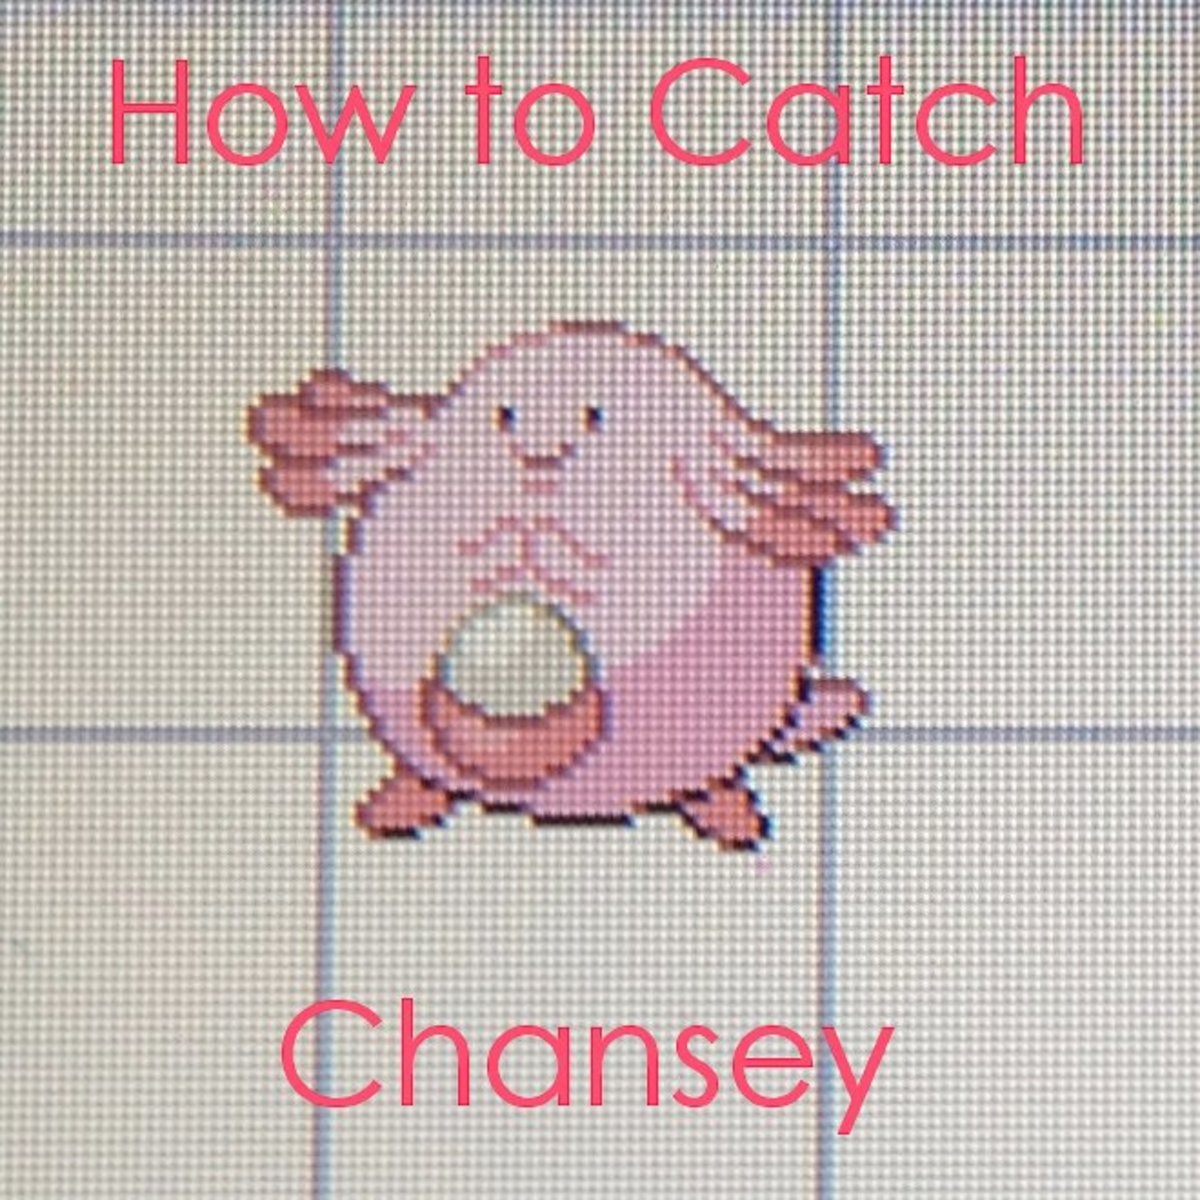 How to Catch Chansey in the 